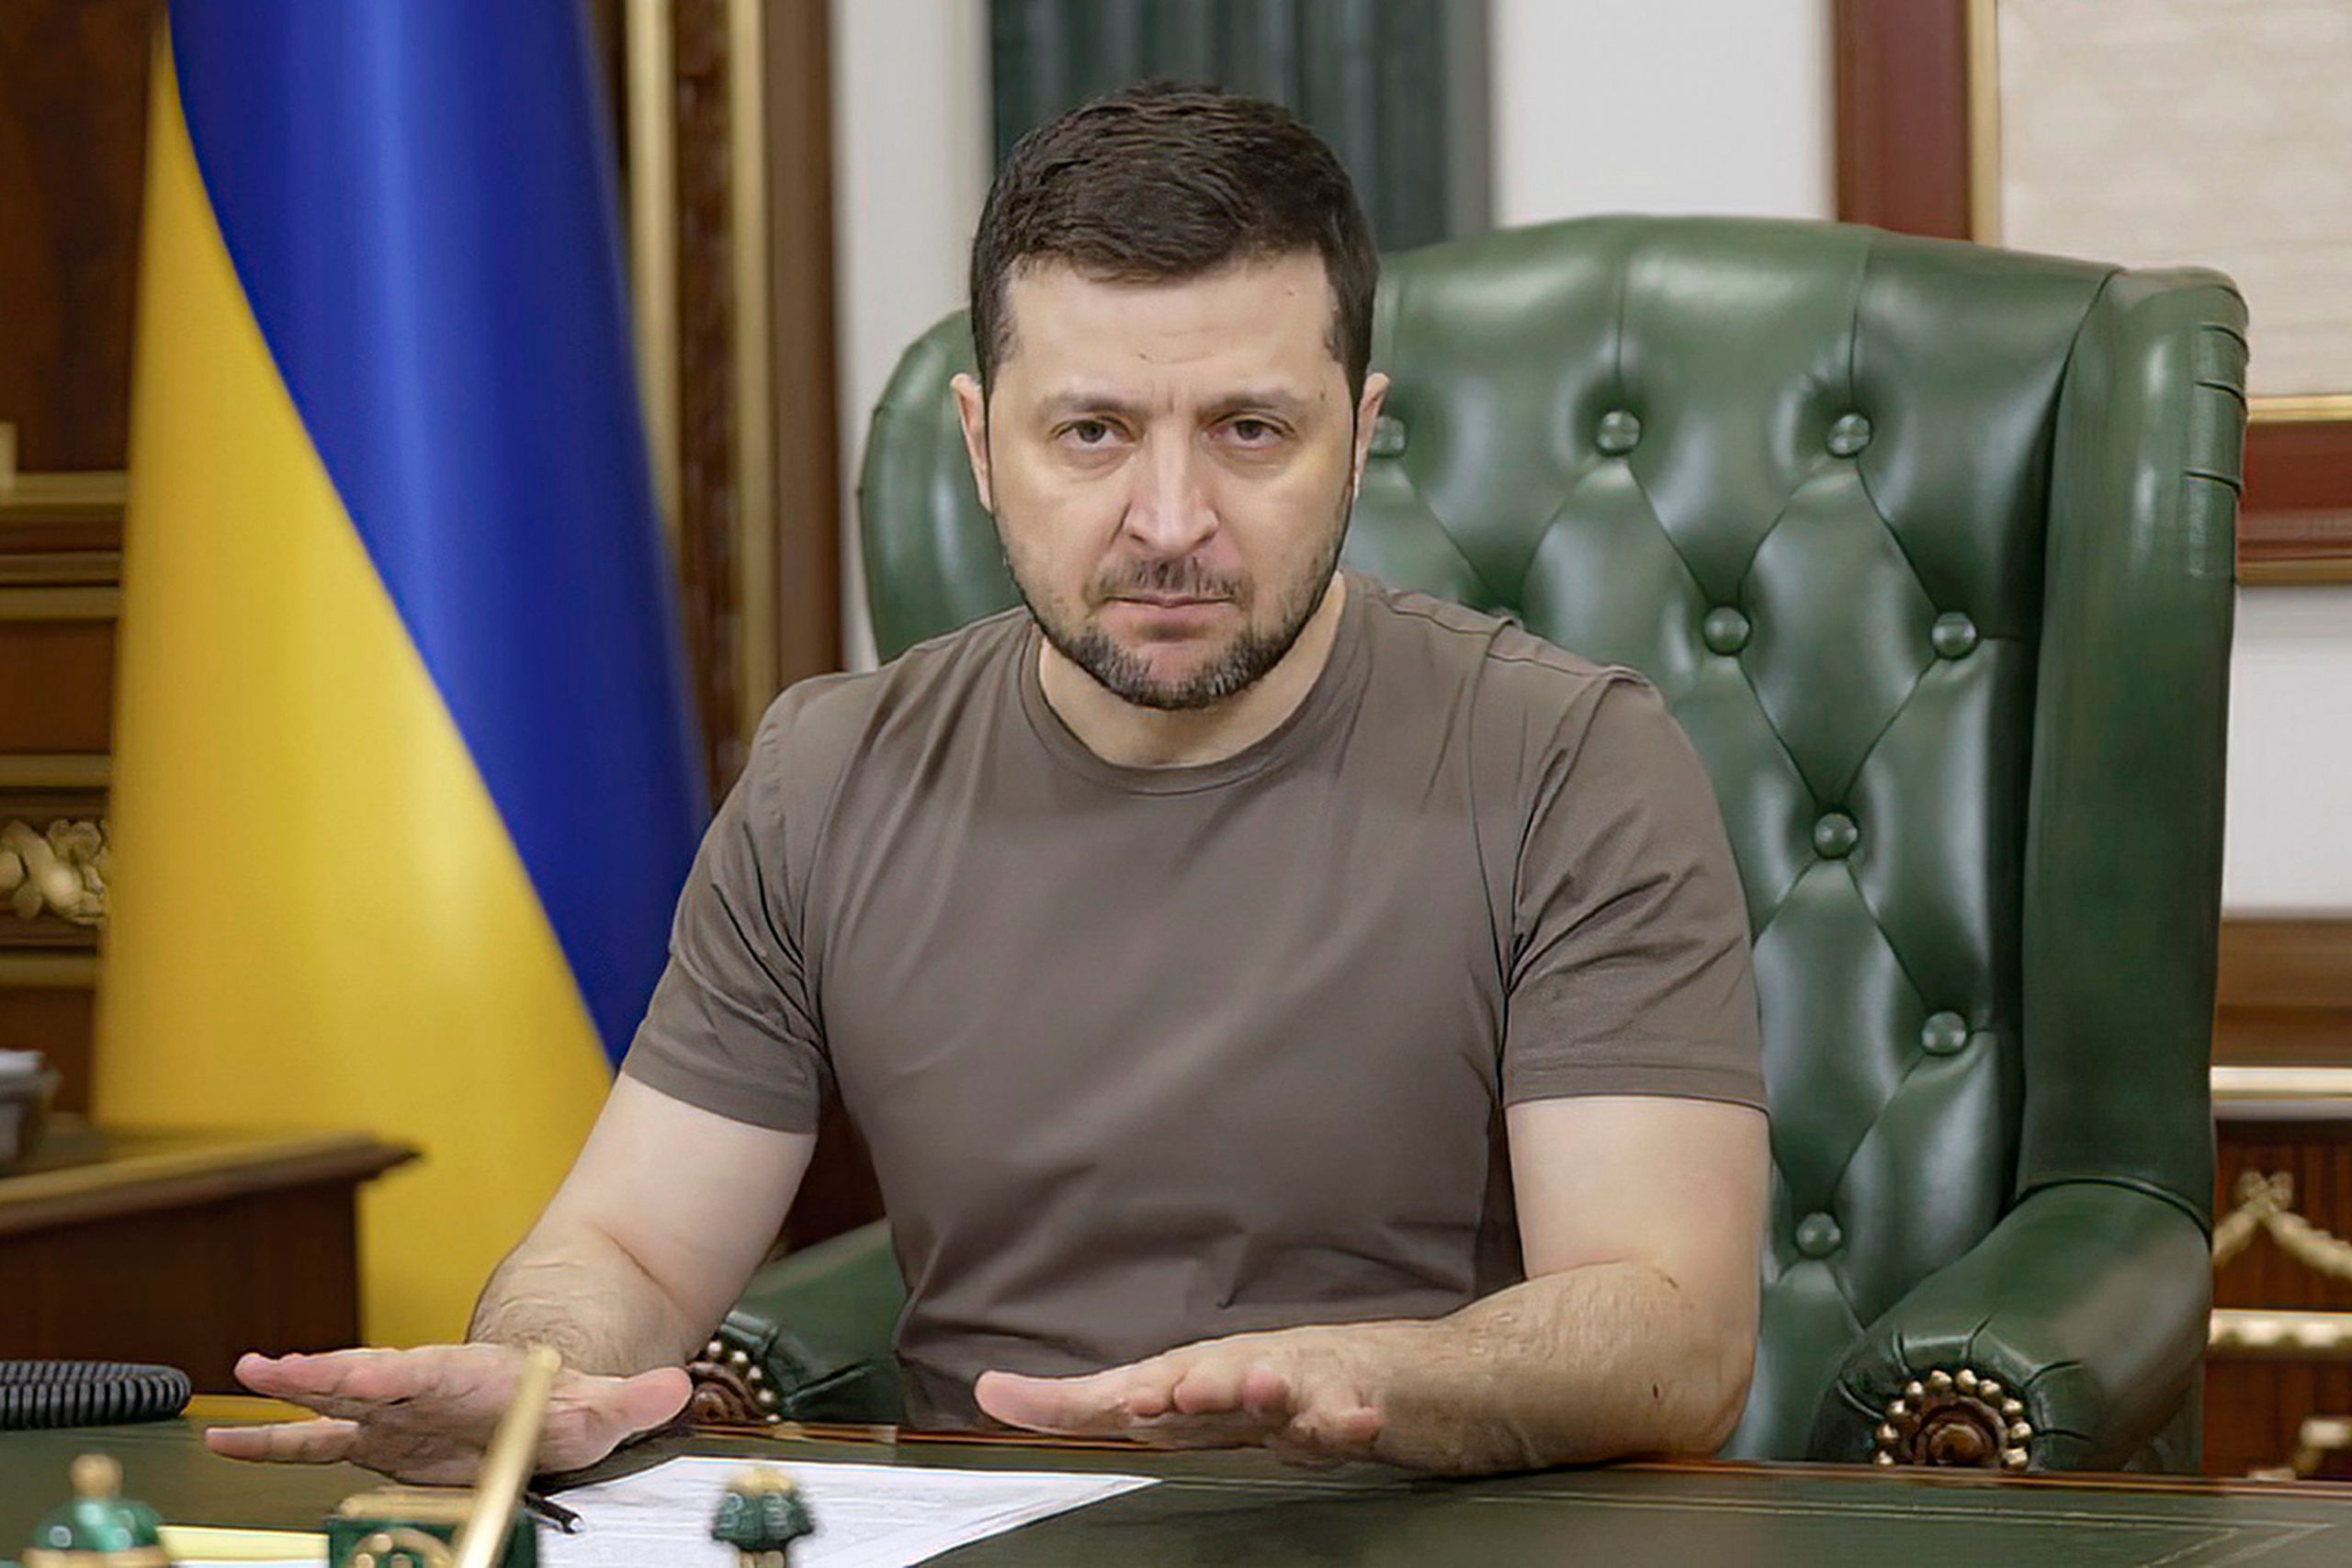 Ukraine ramping up defence in east as Russia targets Donbas: Zelensky